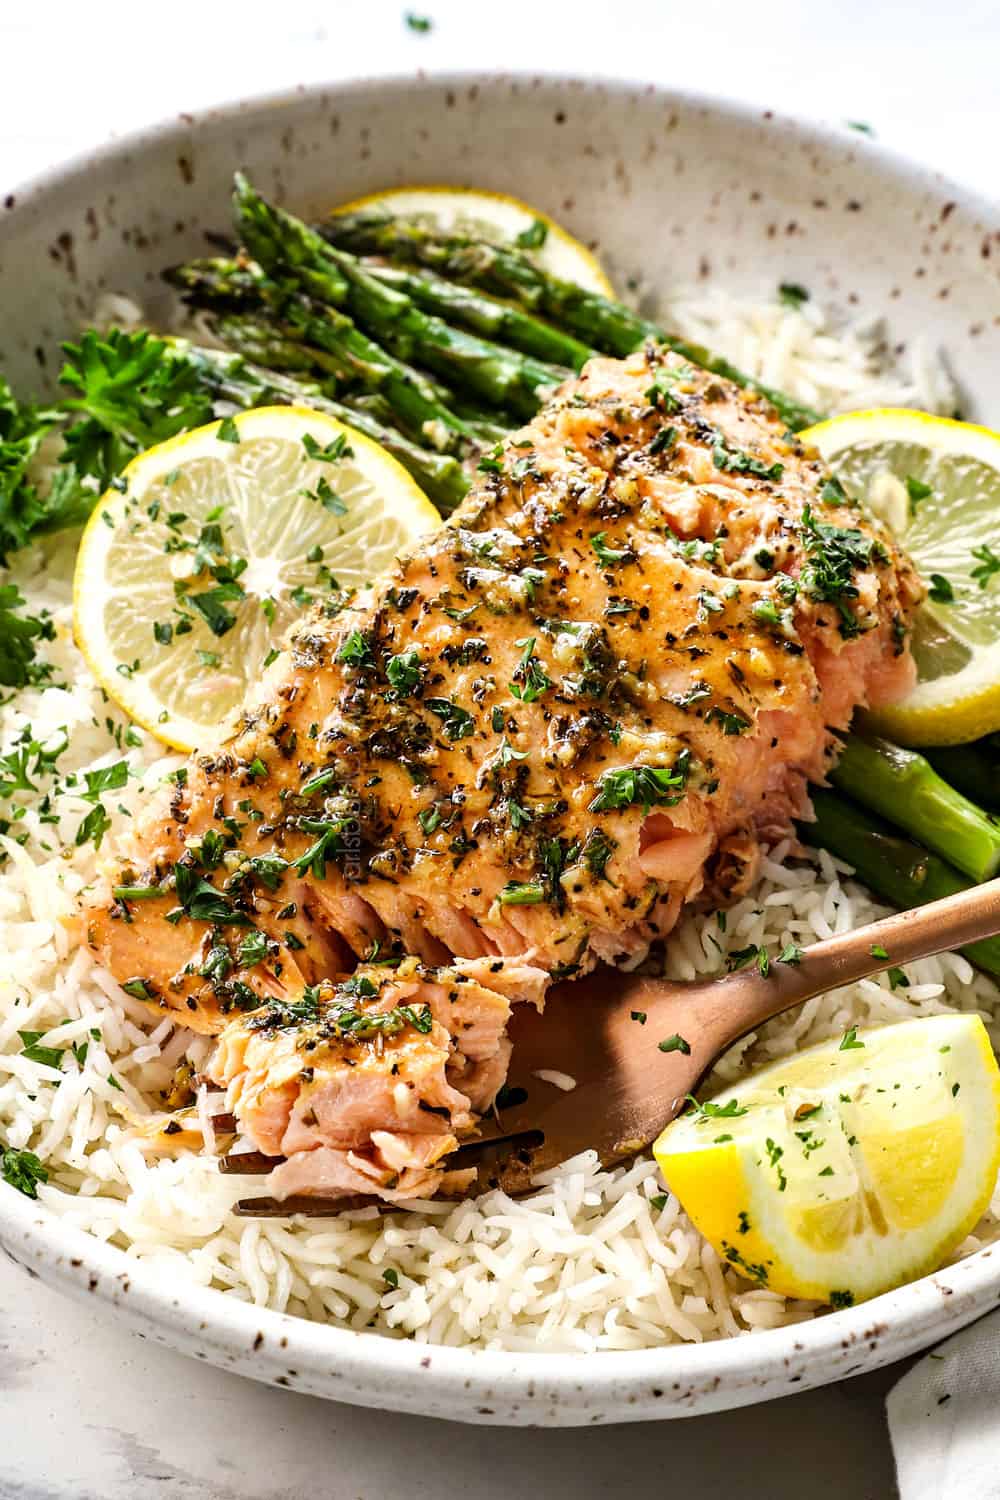 up close of a fillet of baked lemon pepper salmon served over rice